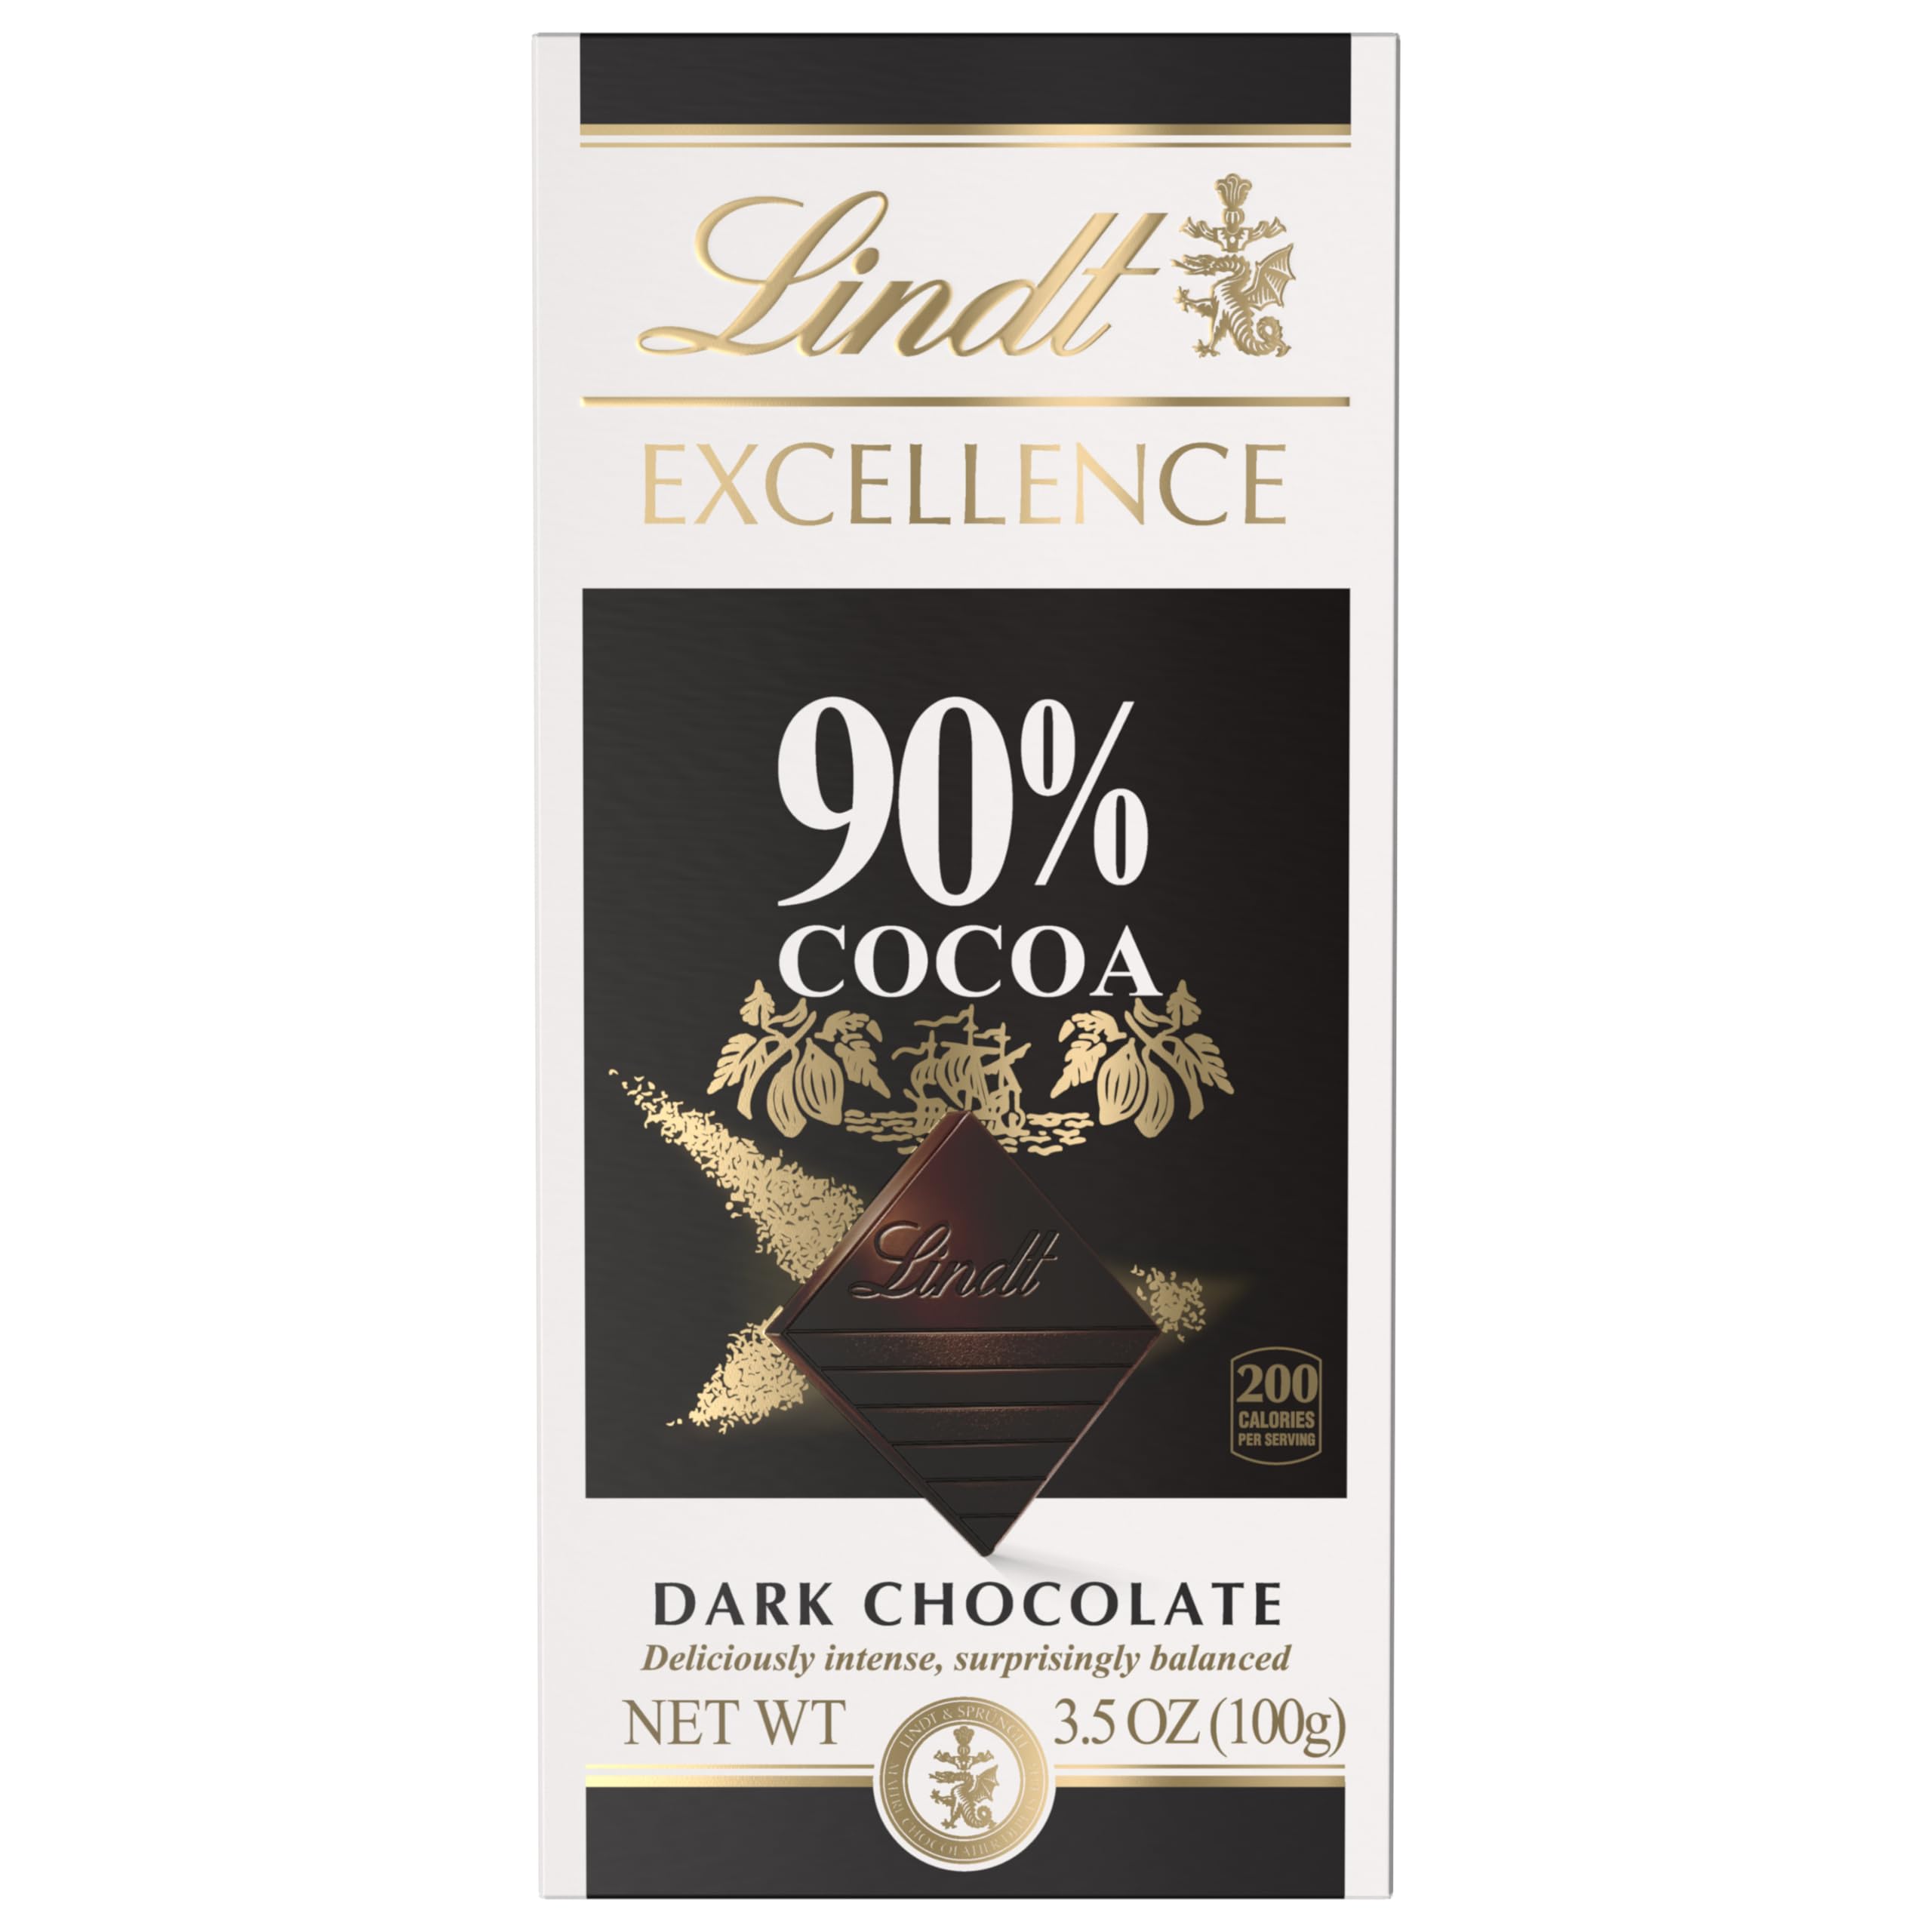 Lindt EXCELLENCE 85% Cocoa Dark Chocolate Bar, Mother’s Day Chocolate Candy, 3.5 oz. 12 Pack $25.20 @ Amazon